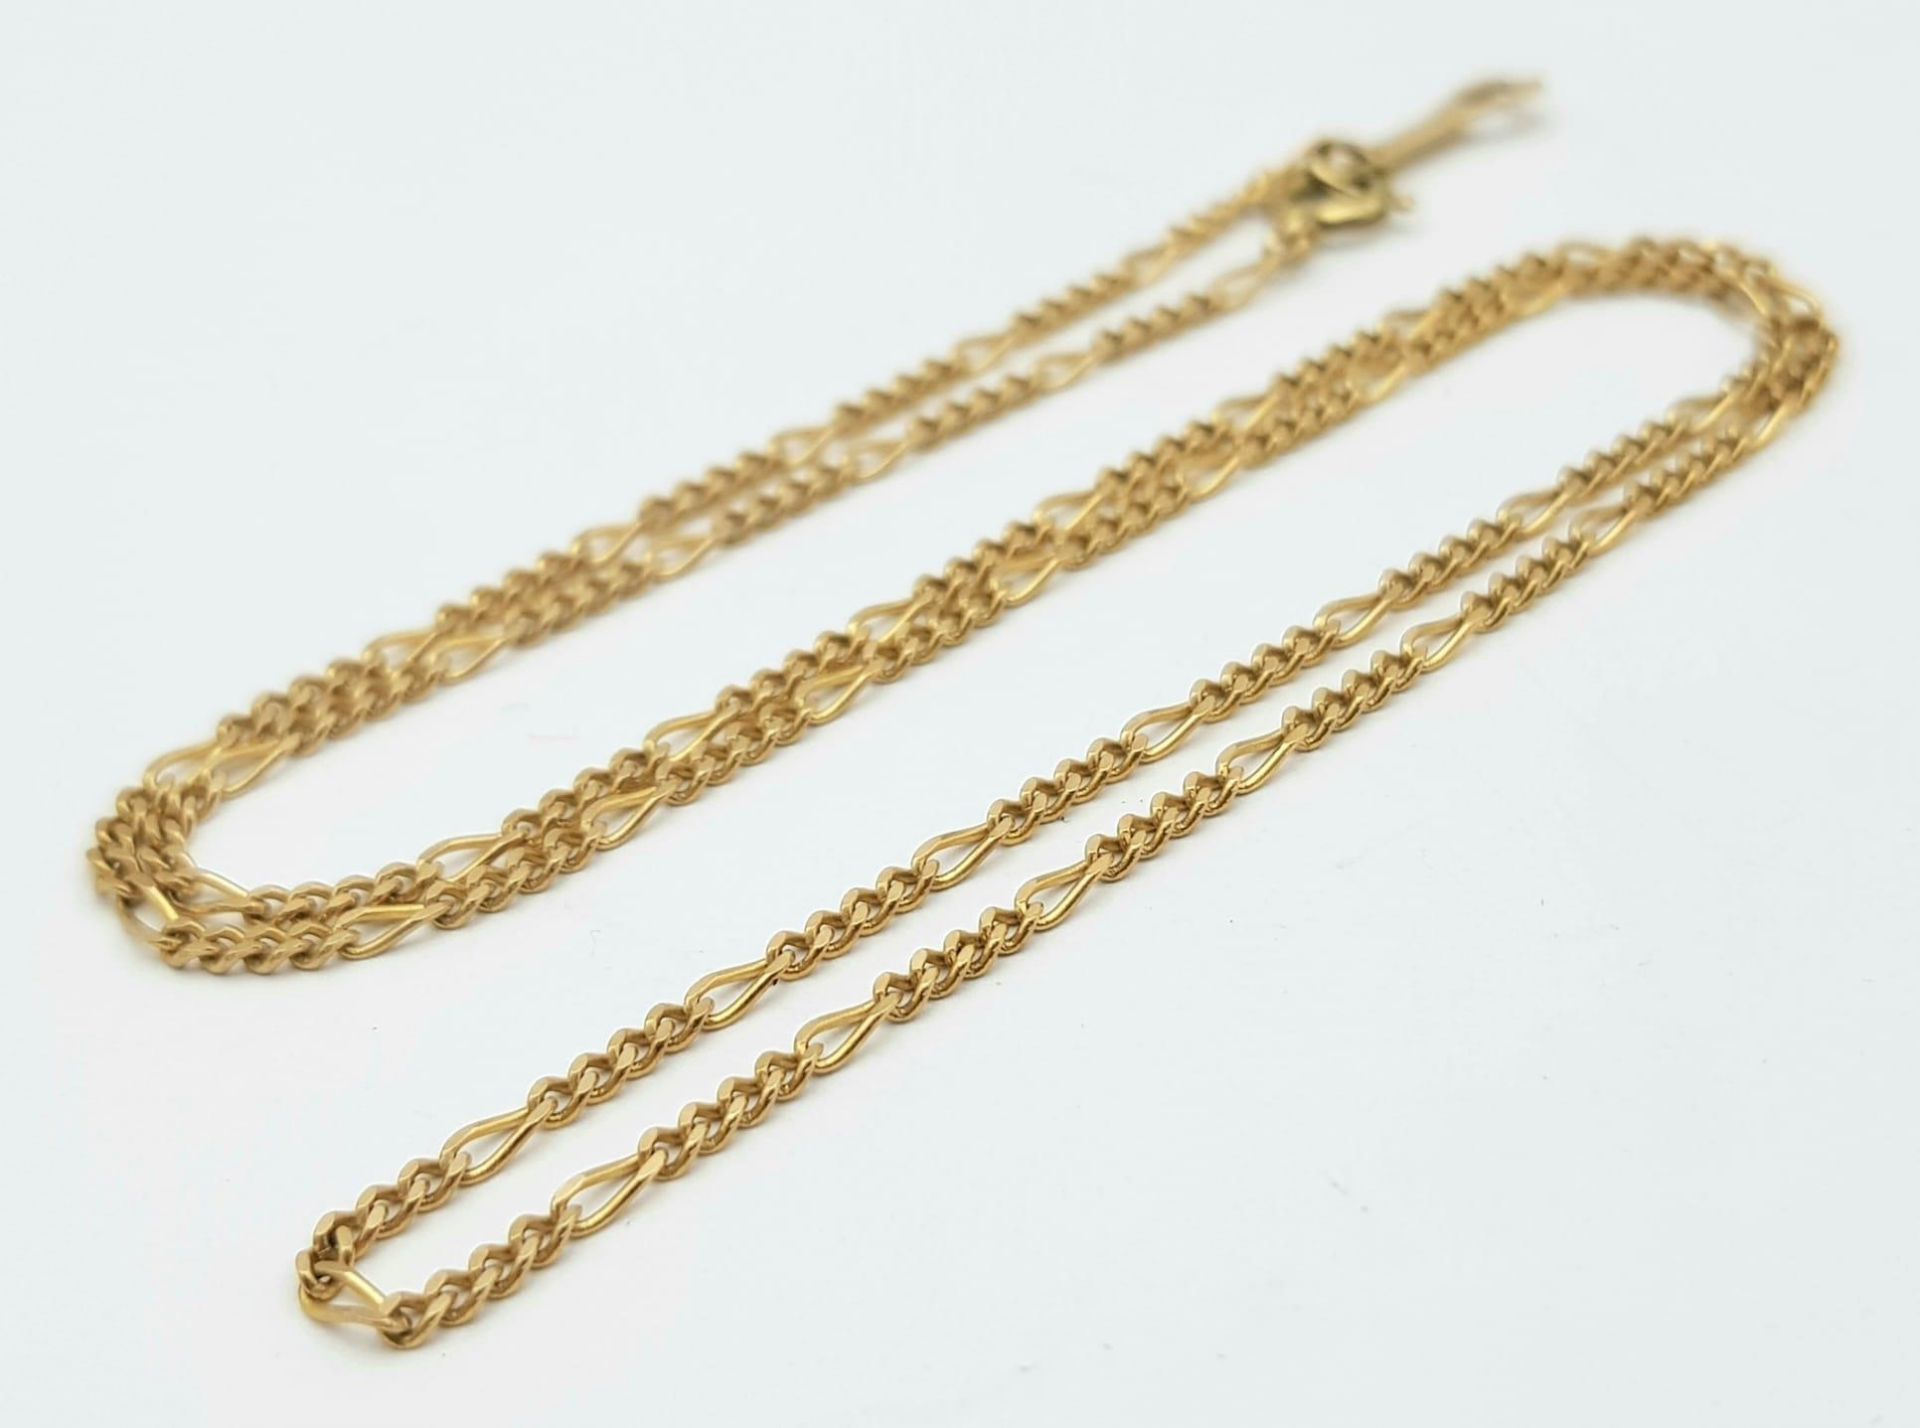 A 9K Yellow Gold Disappearing Necklace. 40cm. 2.2g weight. - Image 2 of 4